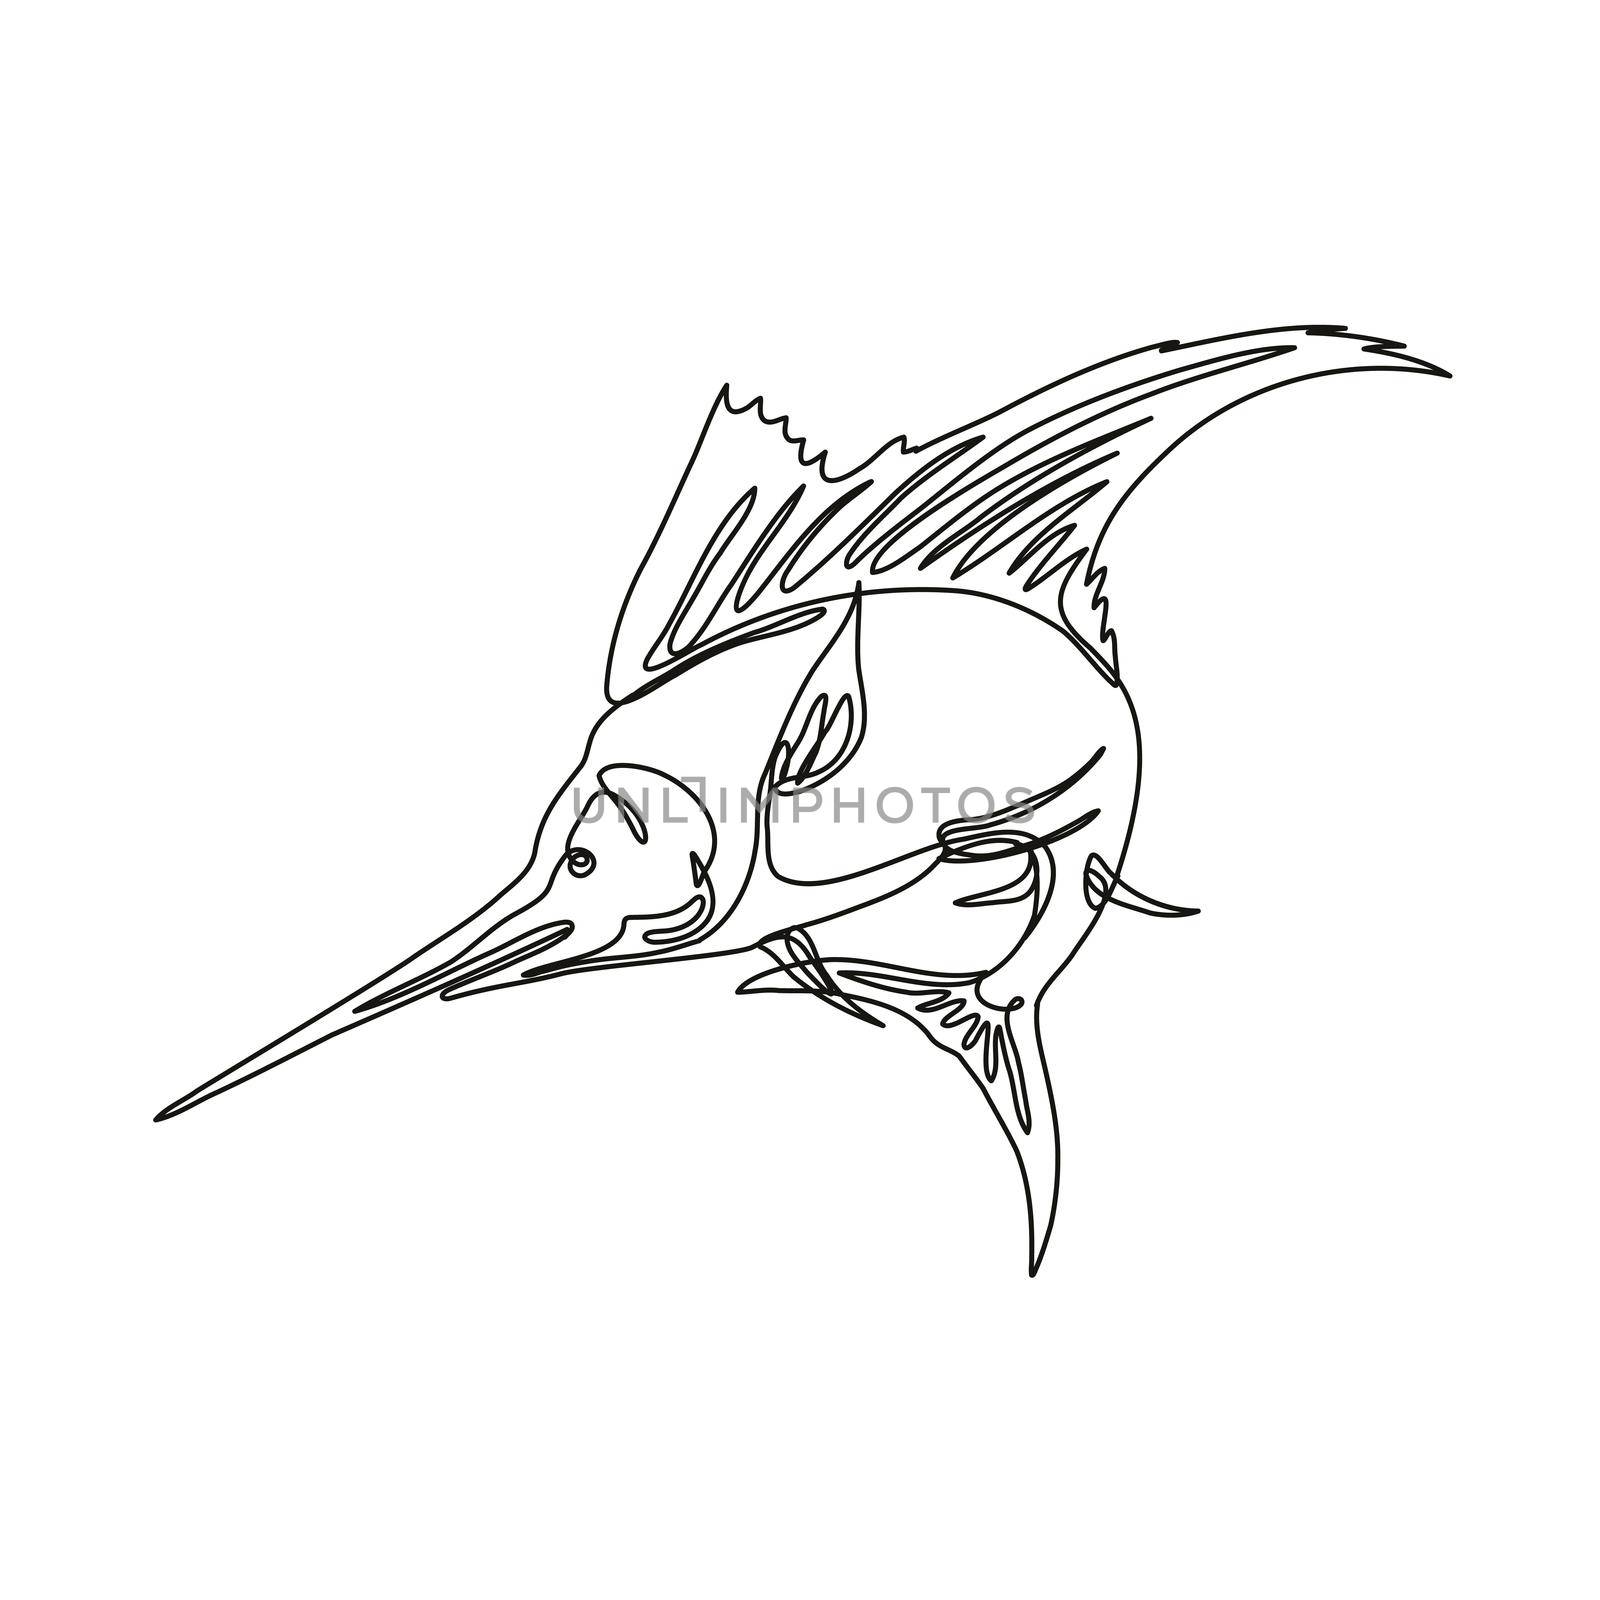 Continuous line drawing illustration of sailfish jumping up done in mono line or doodle style in black and white on isolated background. 